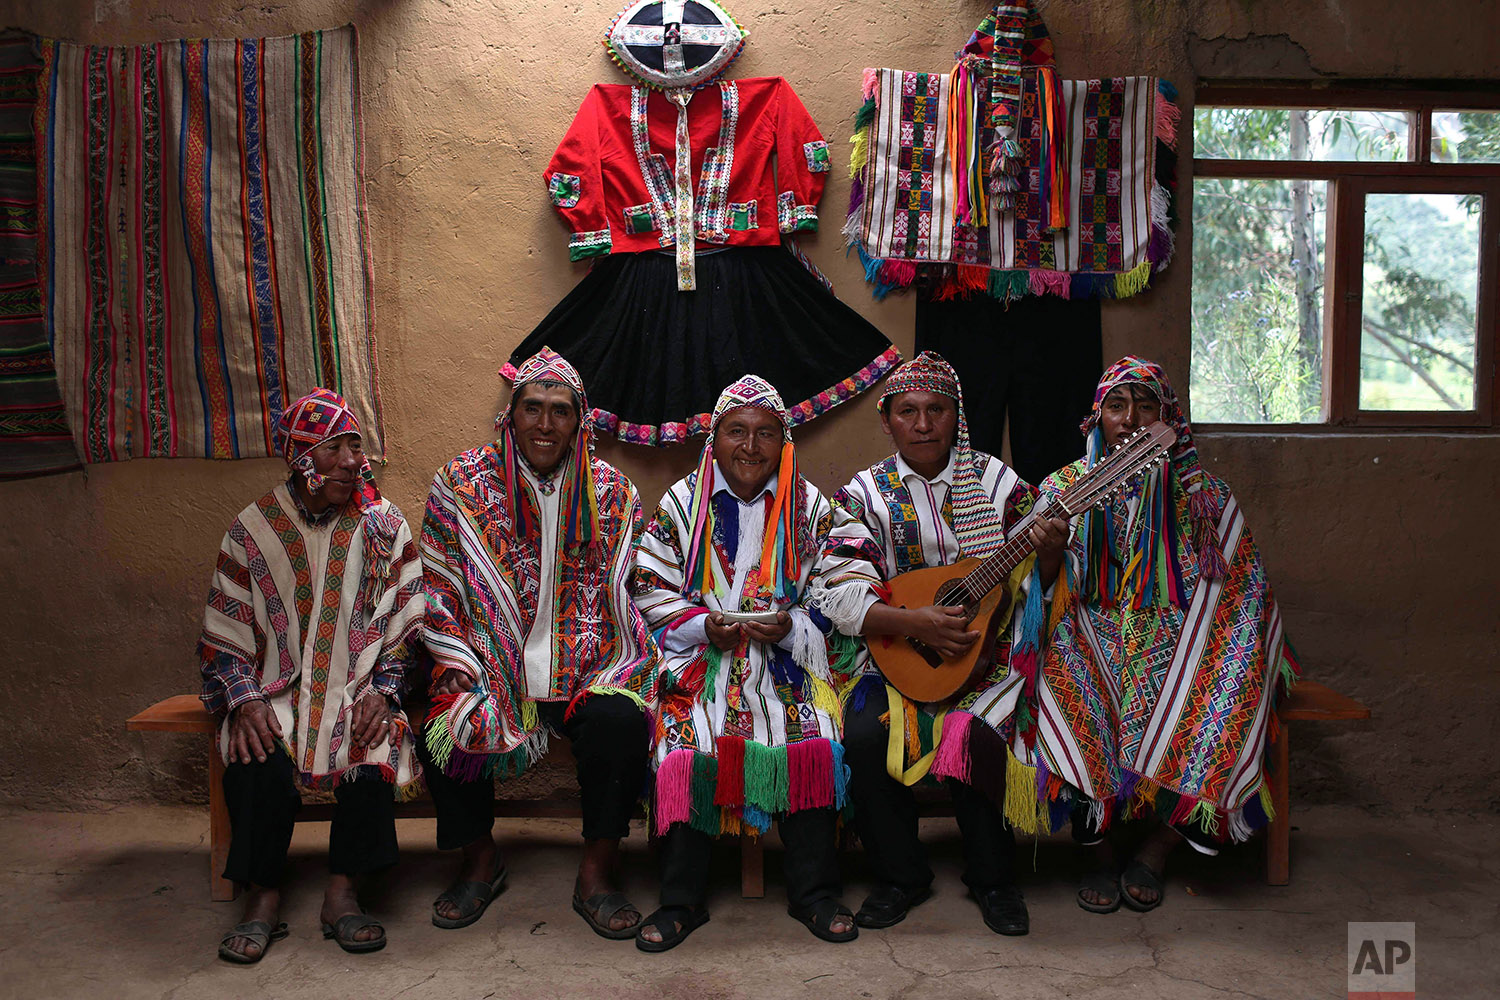  In this April 4, 2018 photo, a group of musicians pose for a portrait in Pitumarca, Peru, near Rainbow Mountain. (AP Photo/Martin Mejia) 